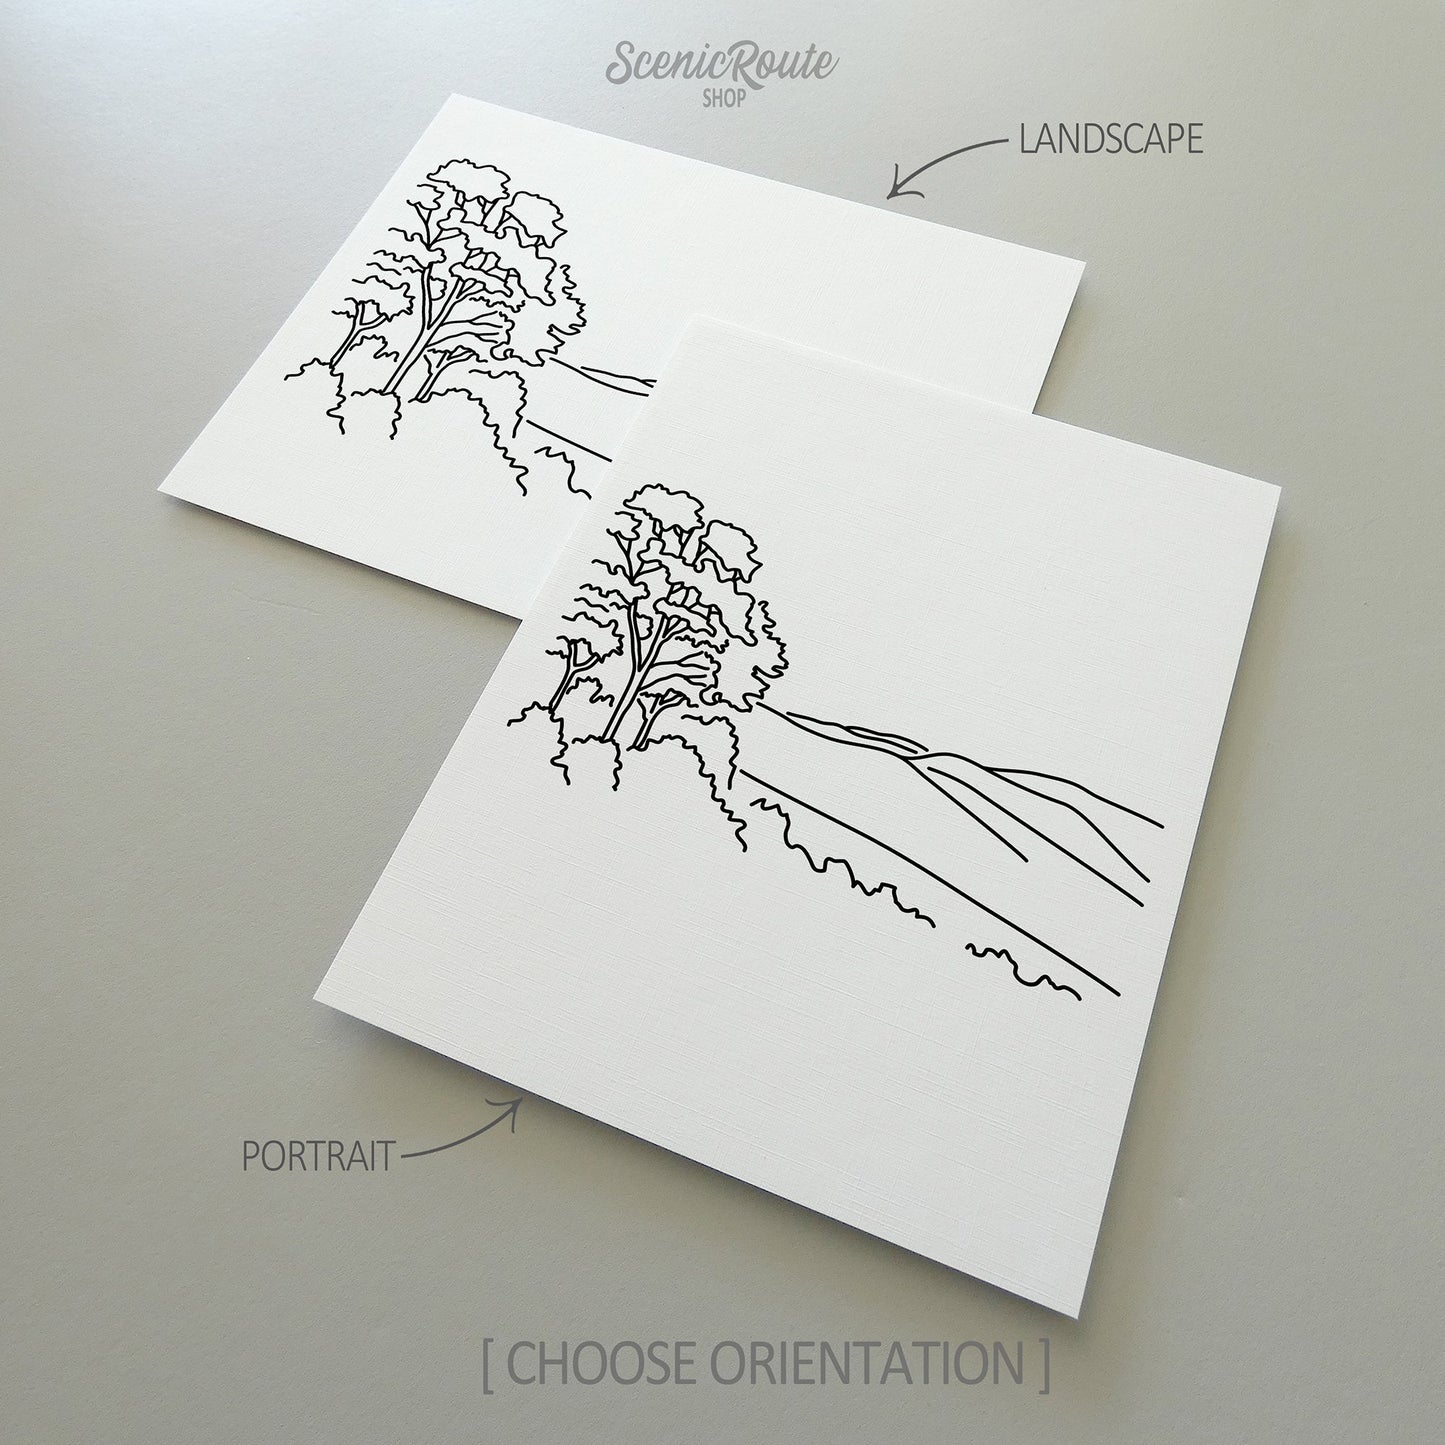 Two line art drawings of Shenandoah National Park on white linen paper with a gray background.  The pieces are shown in portrait and landscape orientation for the available art print options.